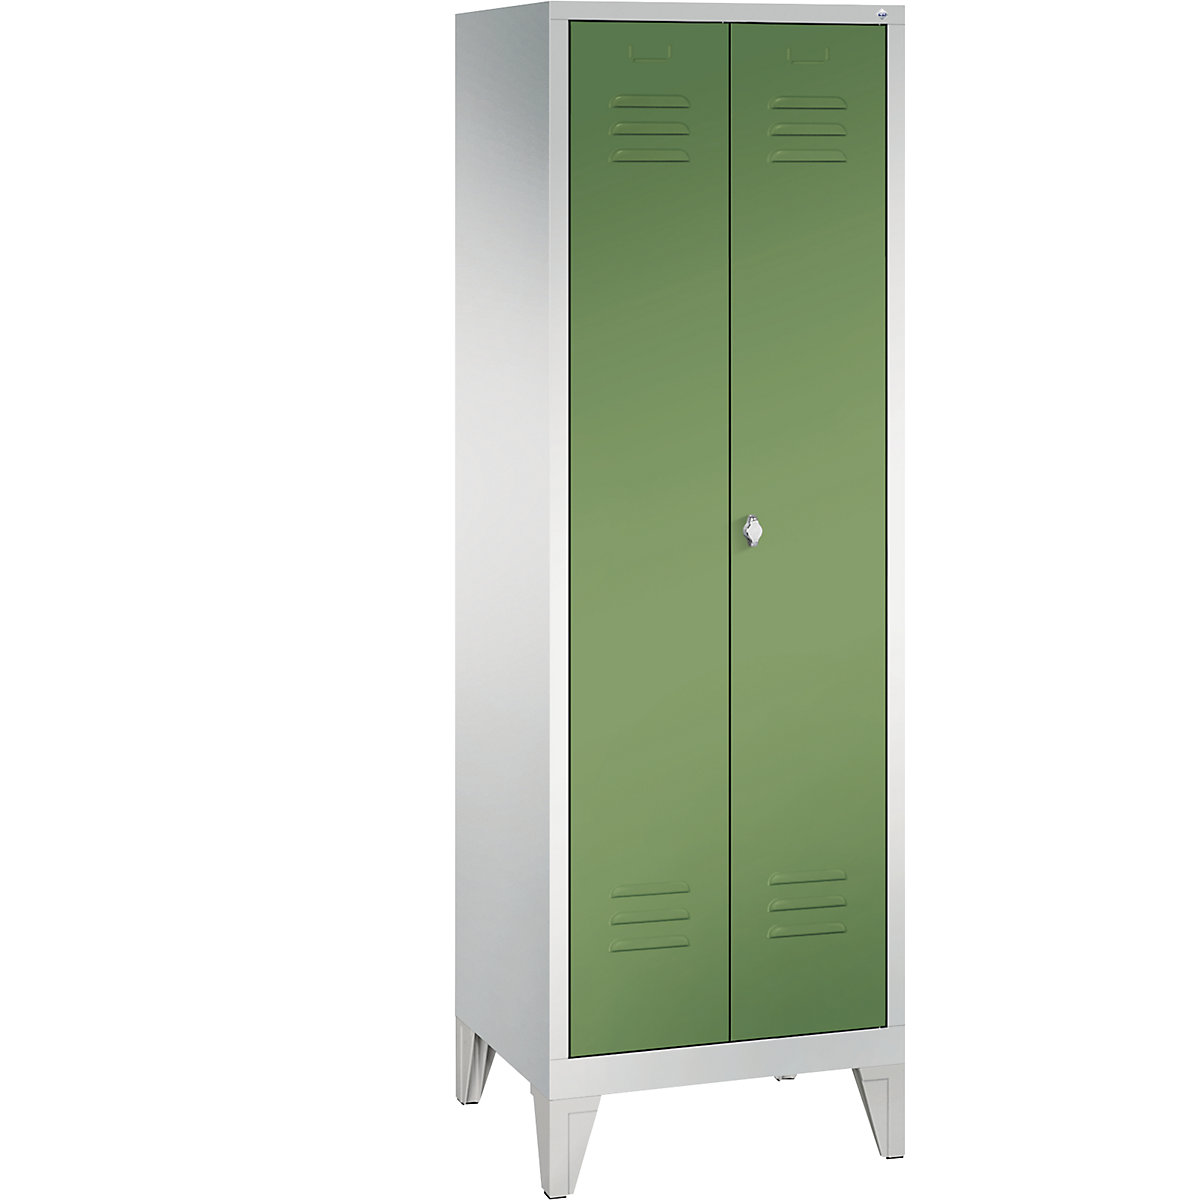 CLASSIC equipment cupboard with feet – C+P, 2 compartments, compartment width 300 mm, light grey / reseda green-6